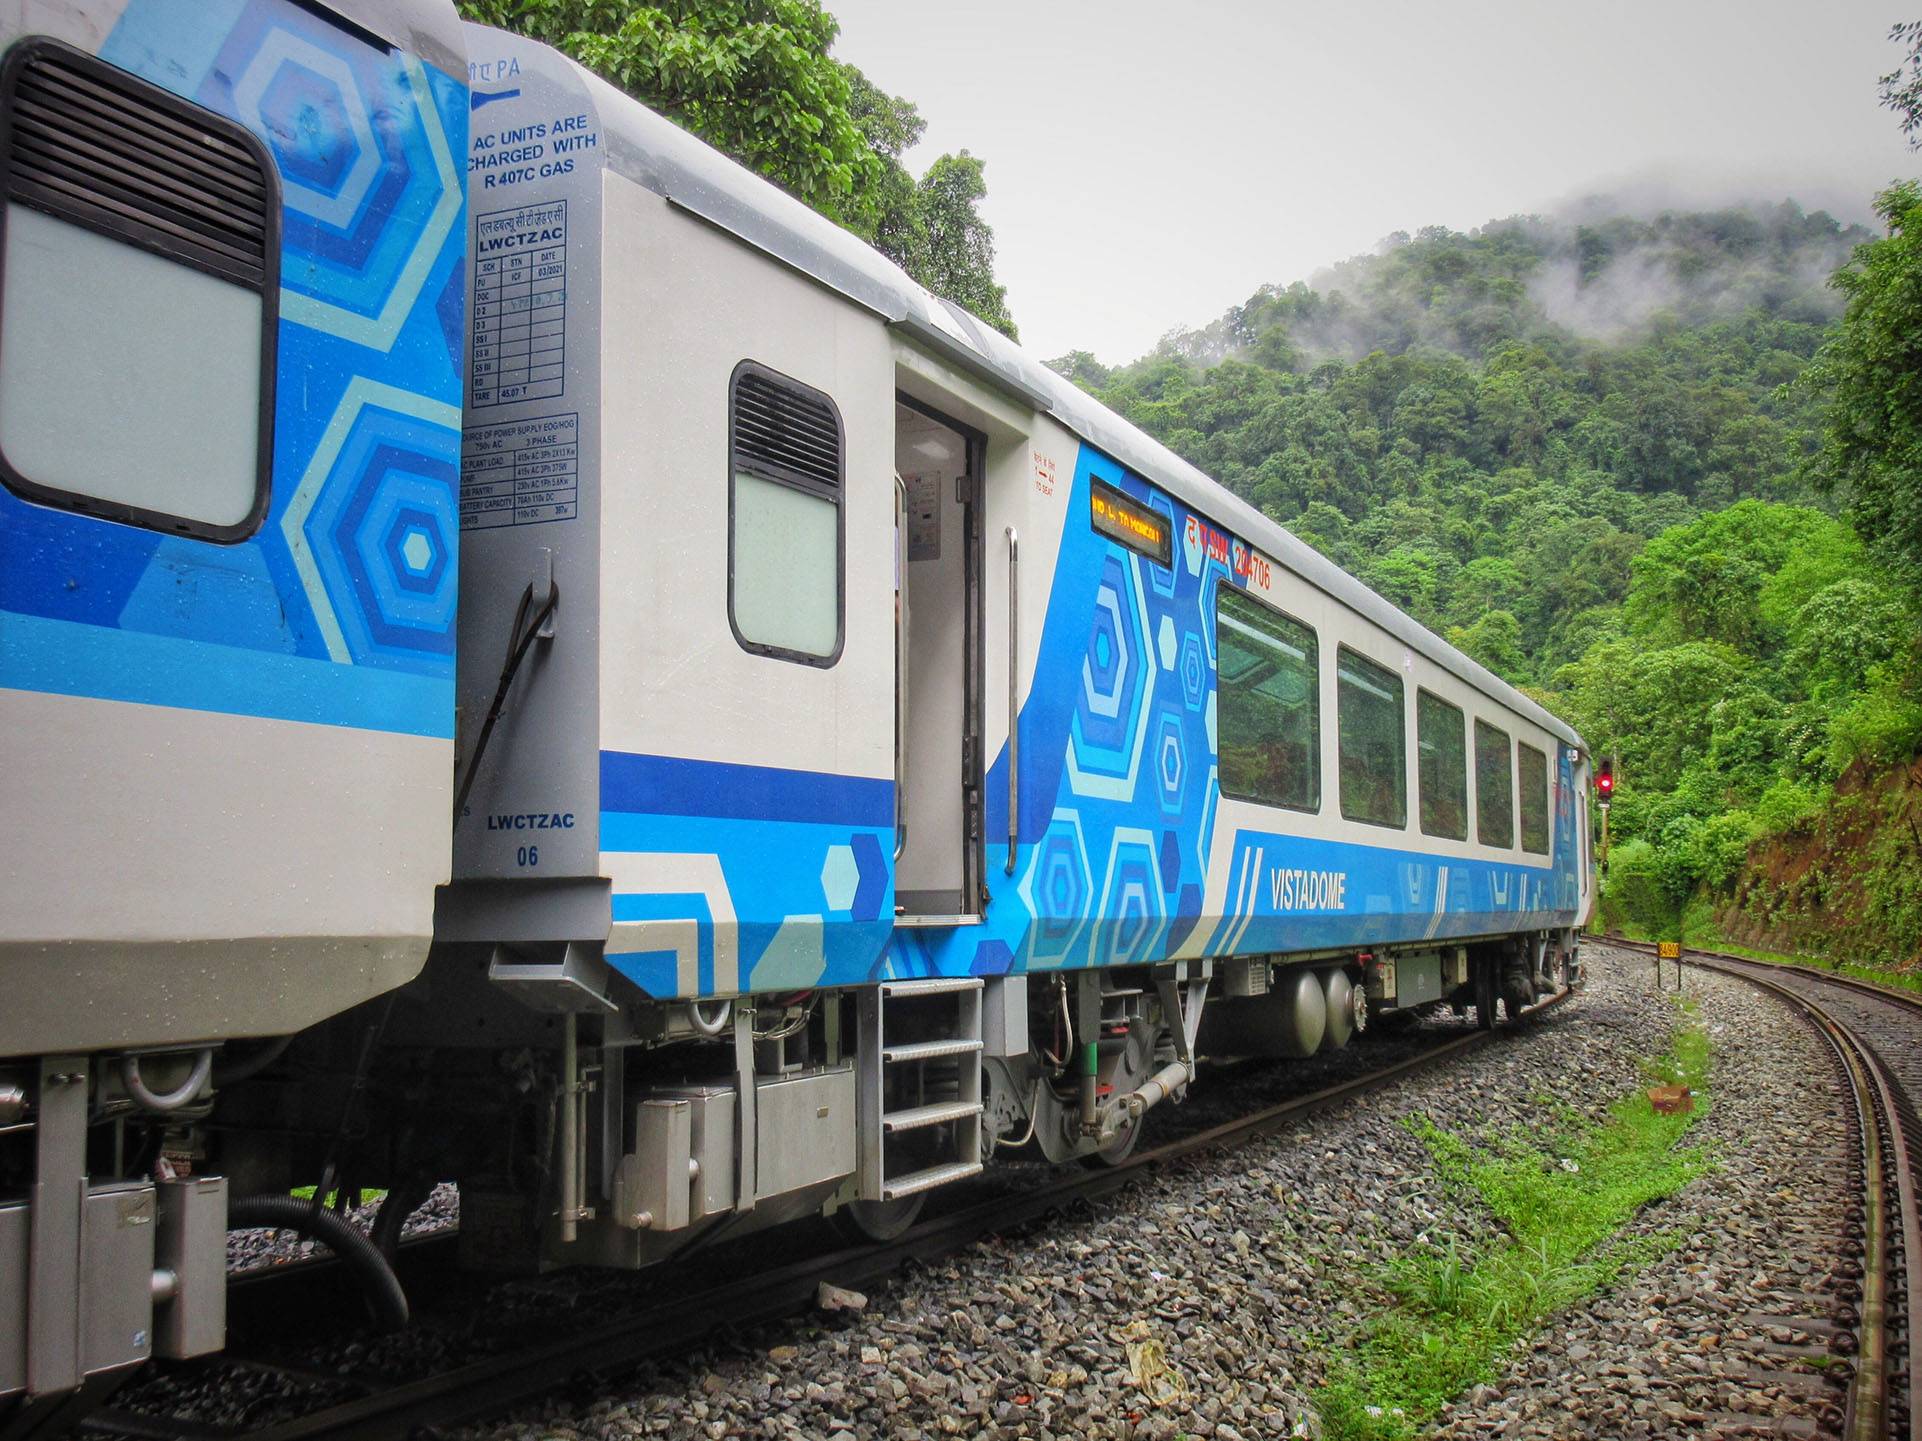 Indian Railways' Vistadome carriage against the beautiful Western Ghats